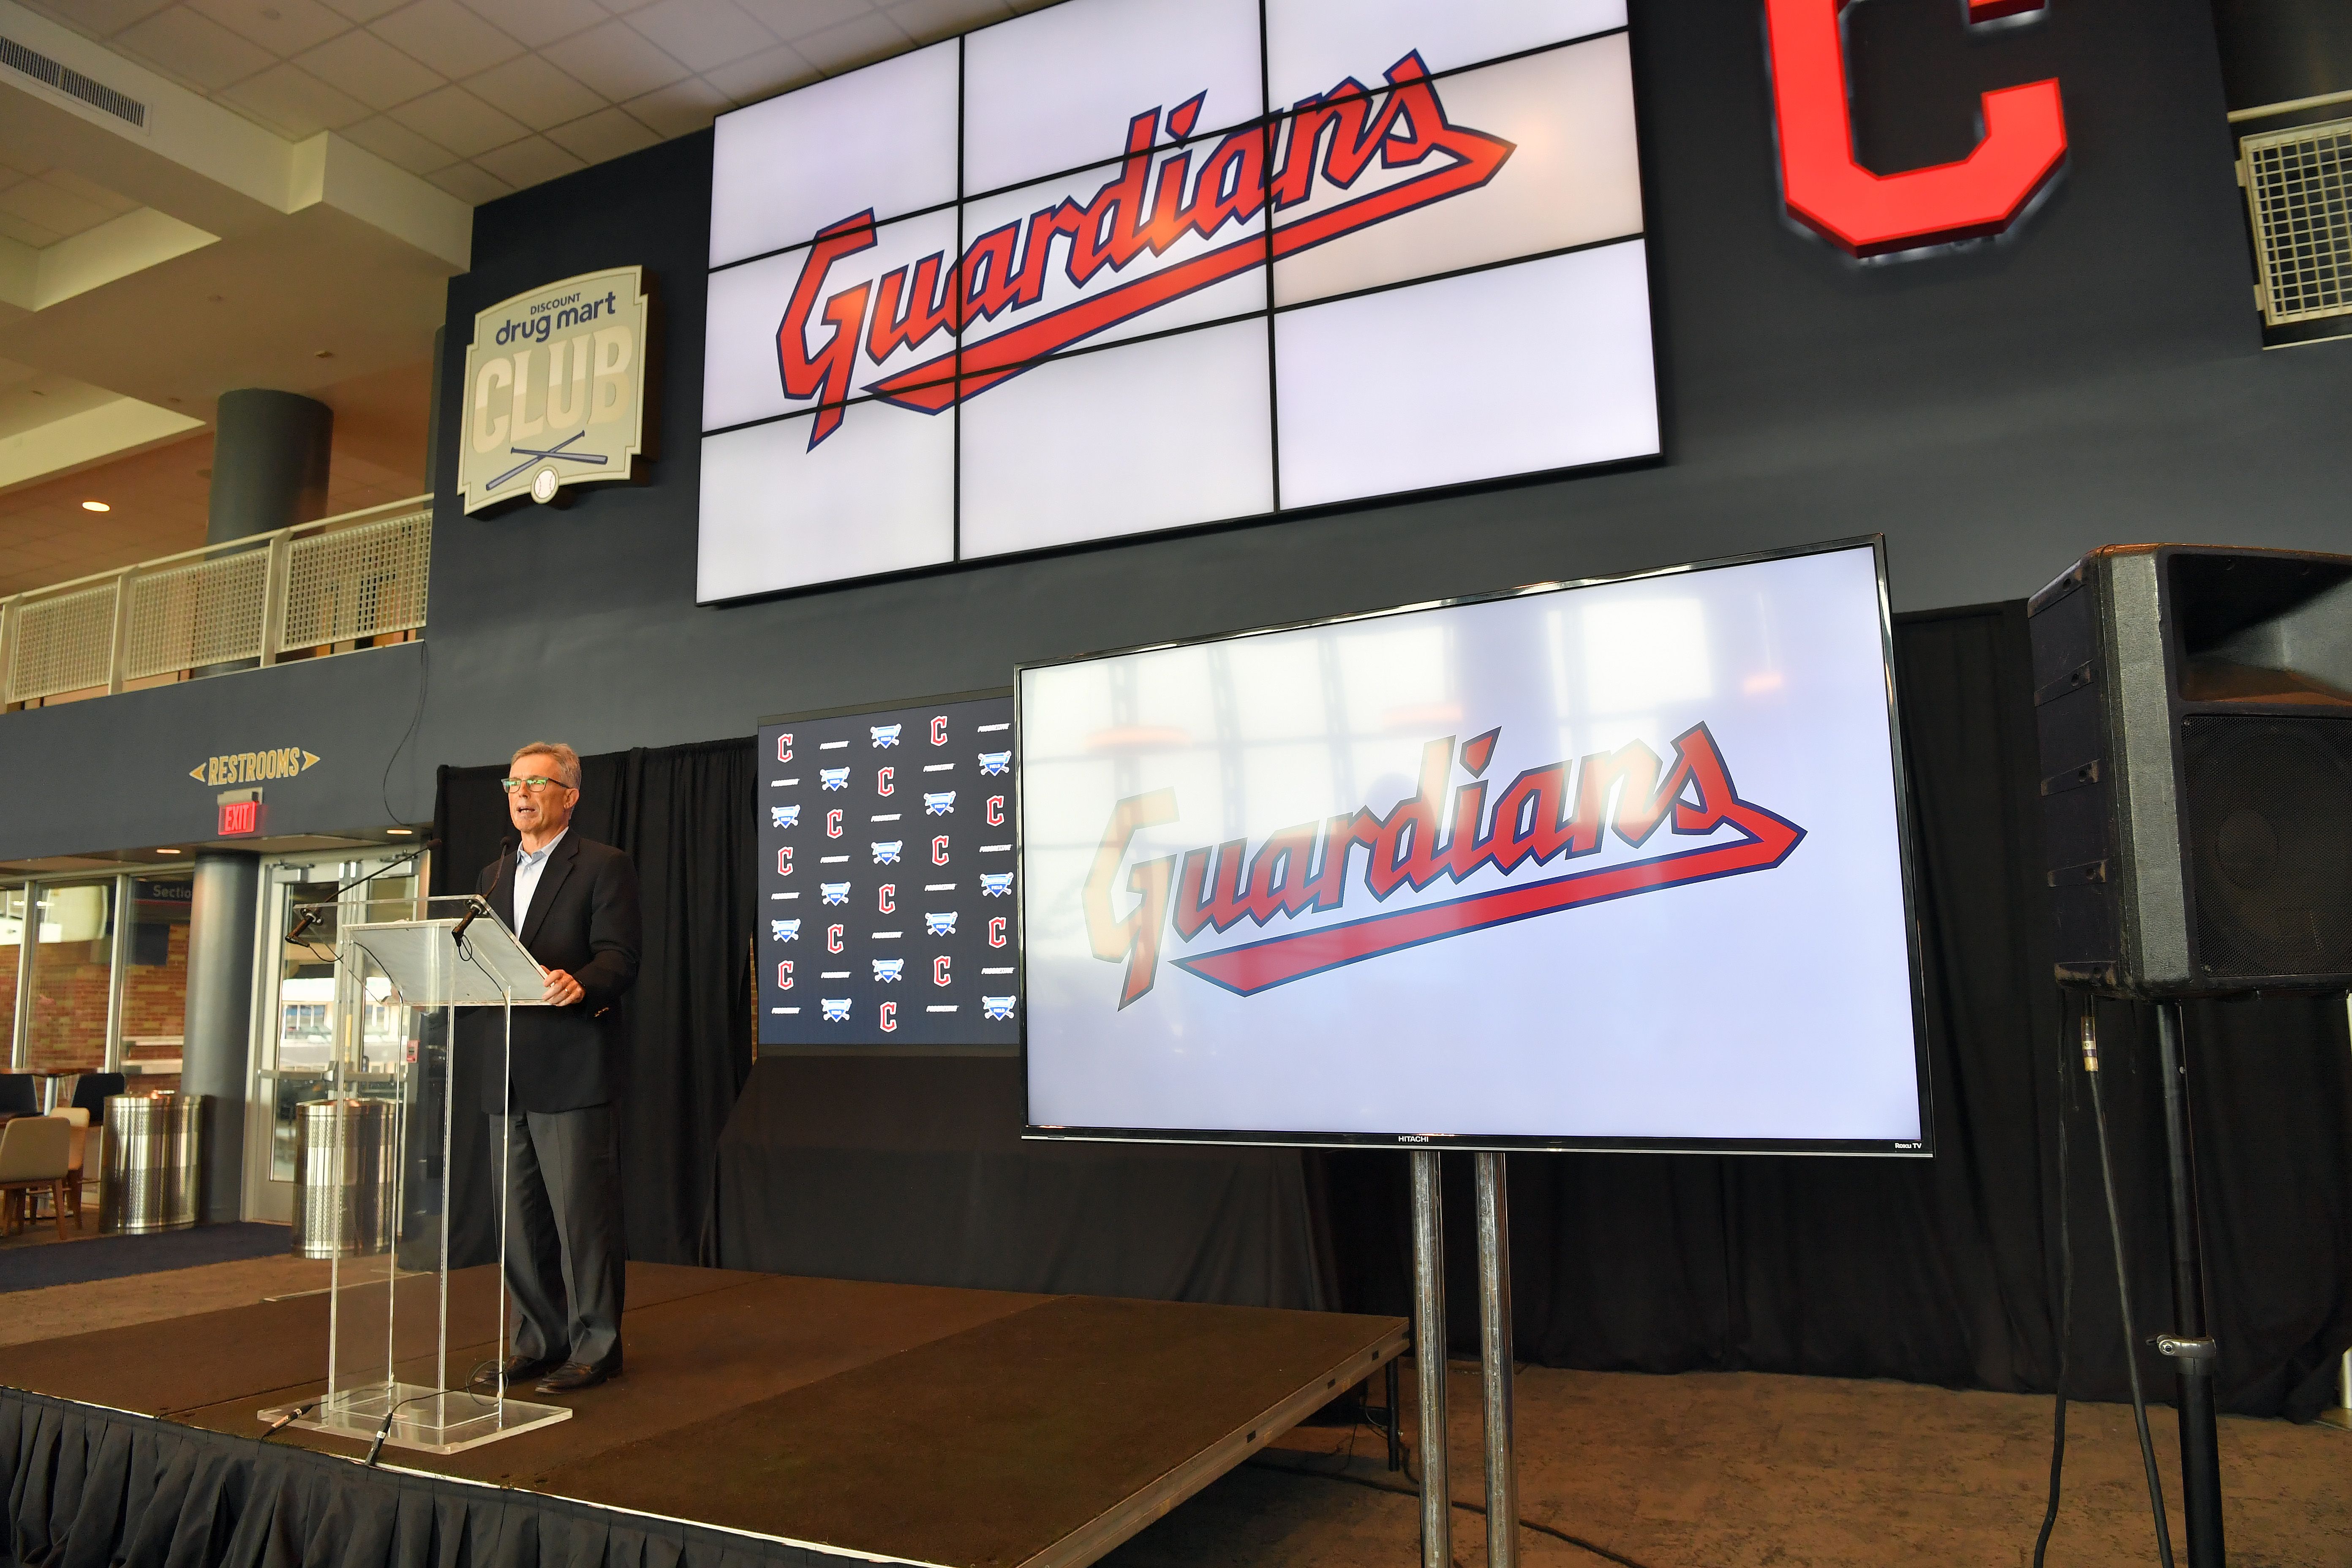 As Cleveland Indians Prepare to Part With Chief Wahoo, Tensions